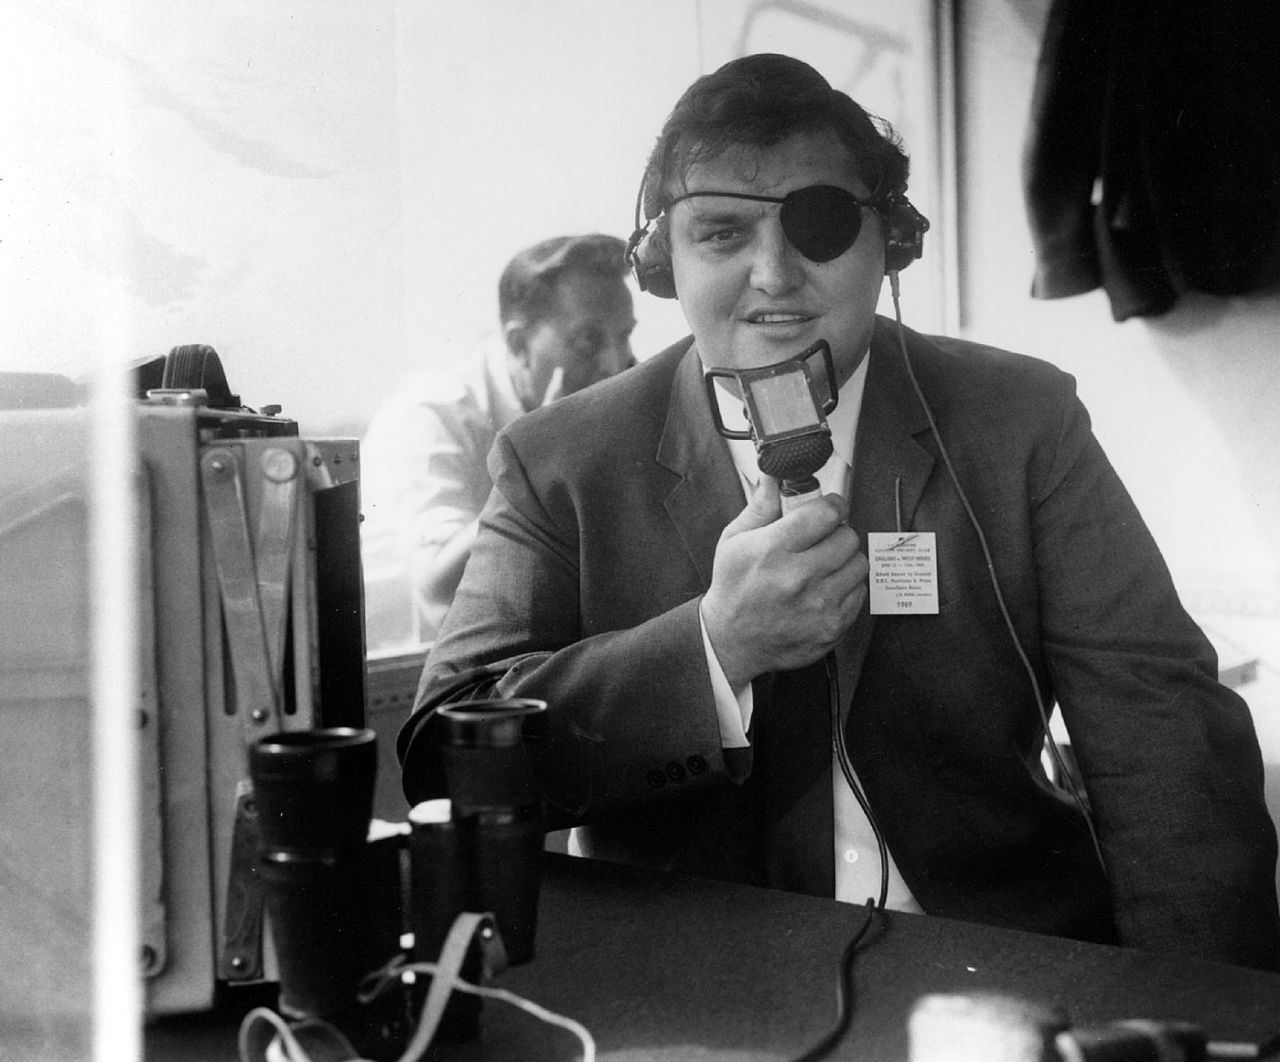 Colin Milburn, wearing an eyepatch after his accident, does commentary for the BBC, Old Trafford, June 12, 1969